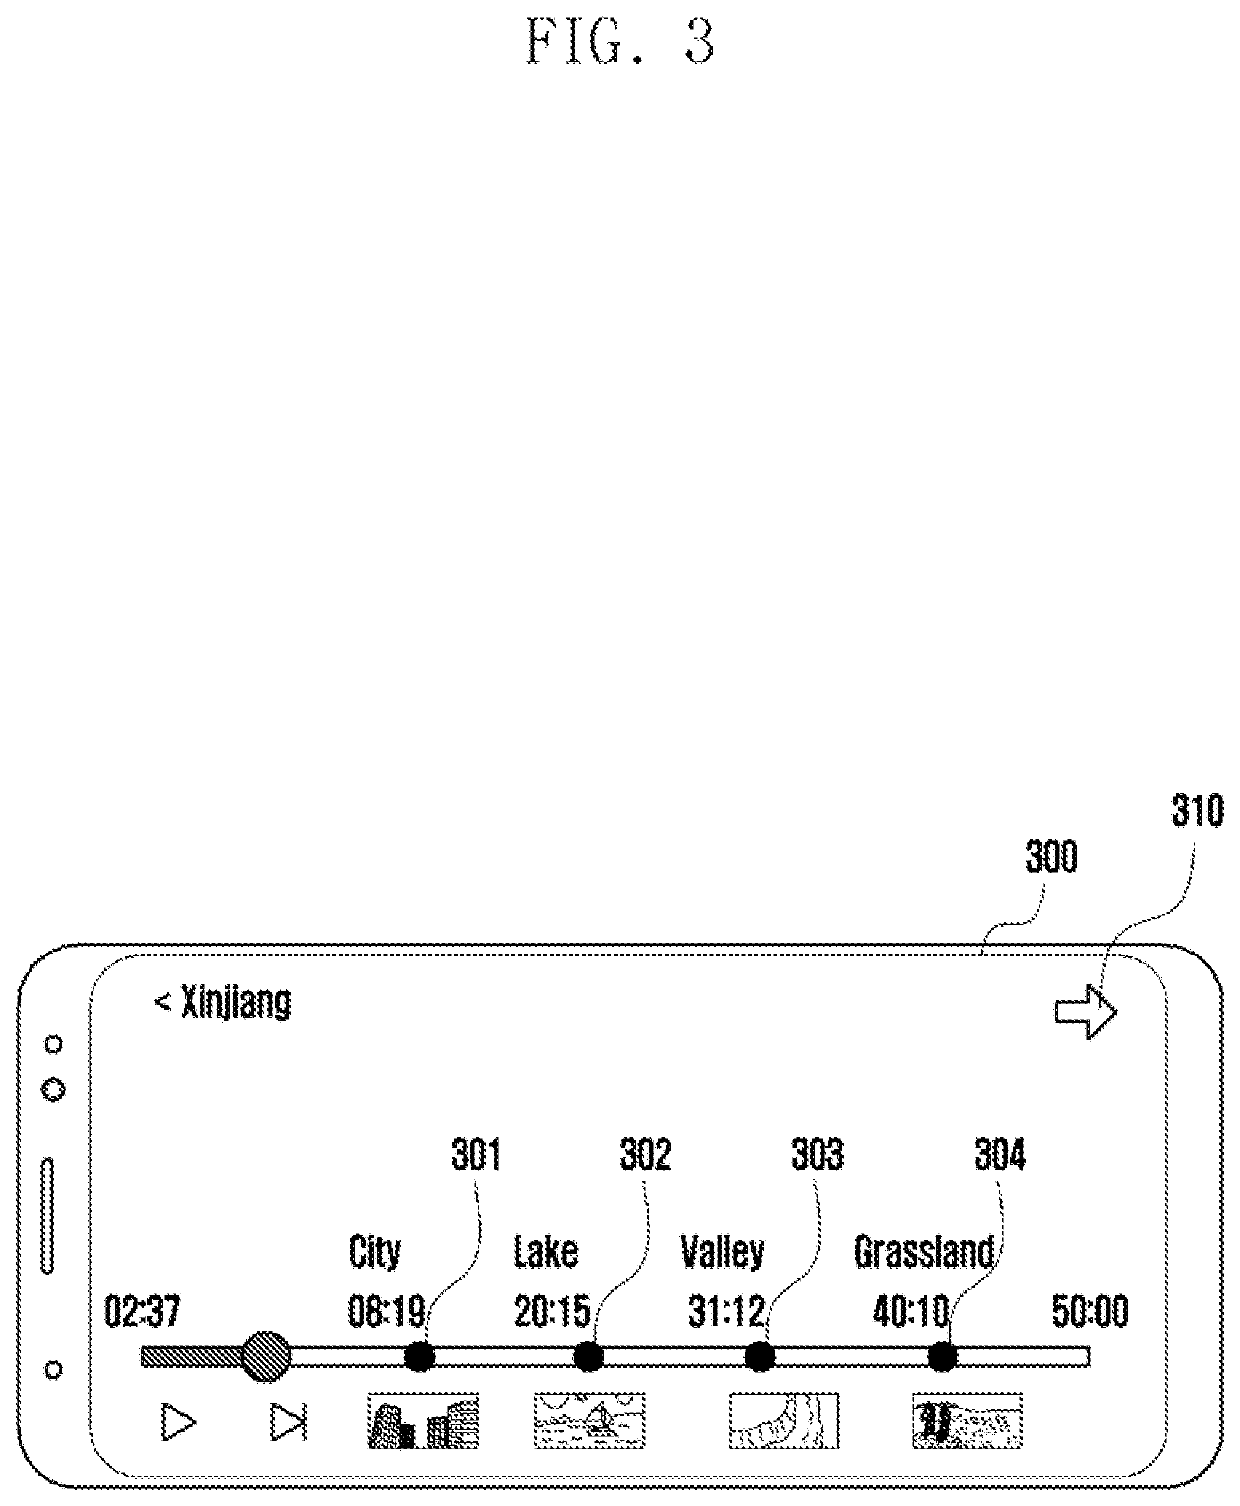 Method and device for controlling video playback